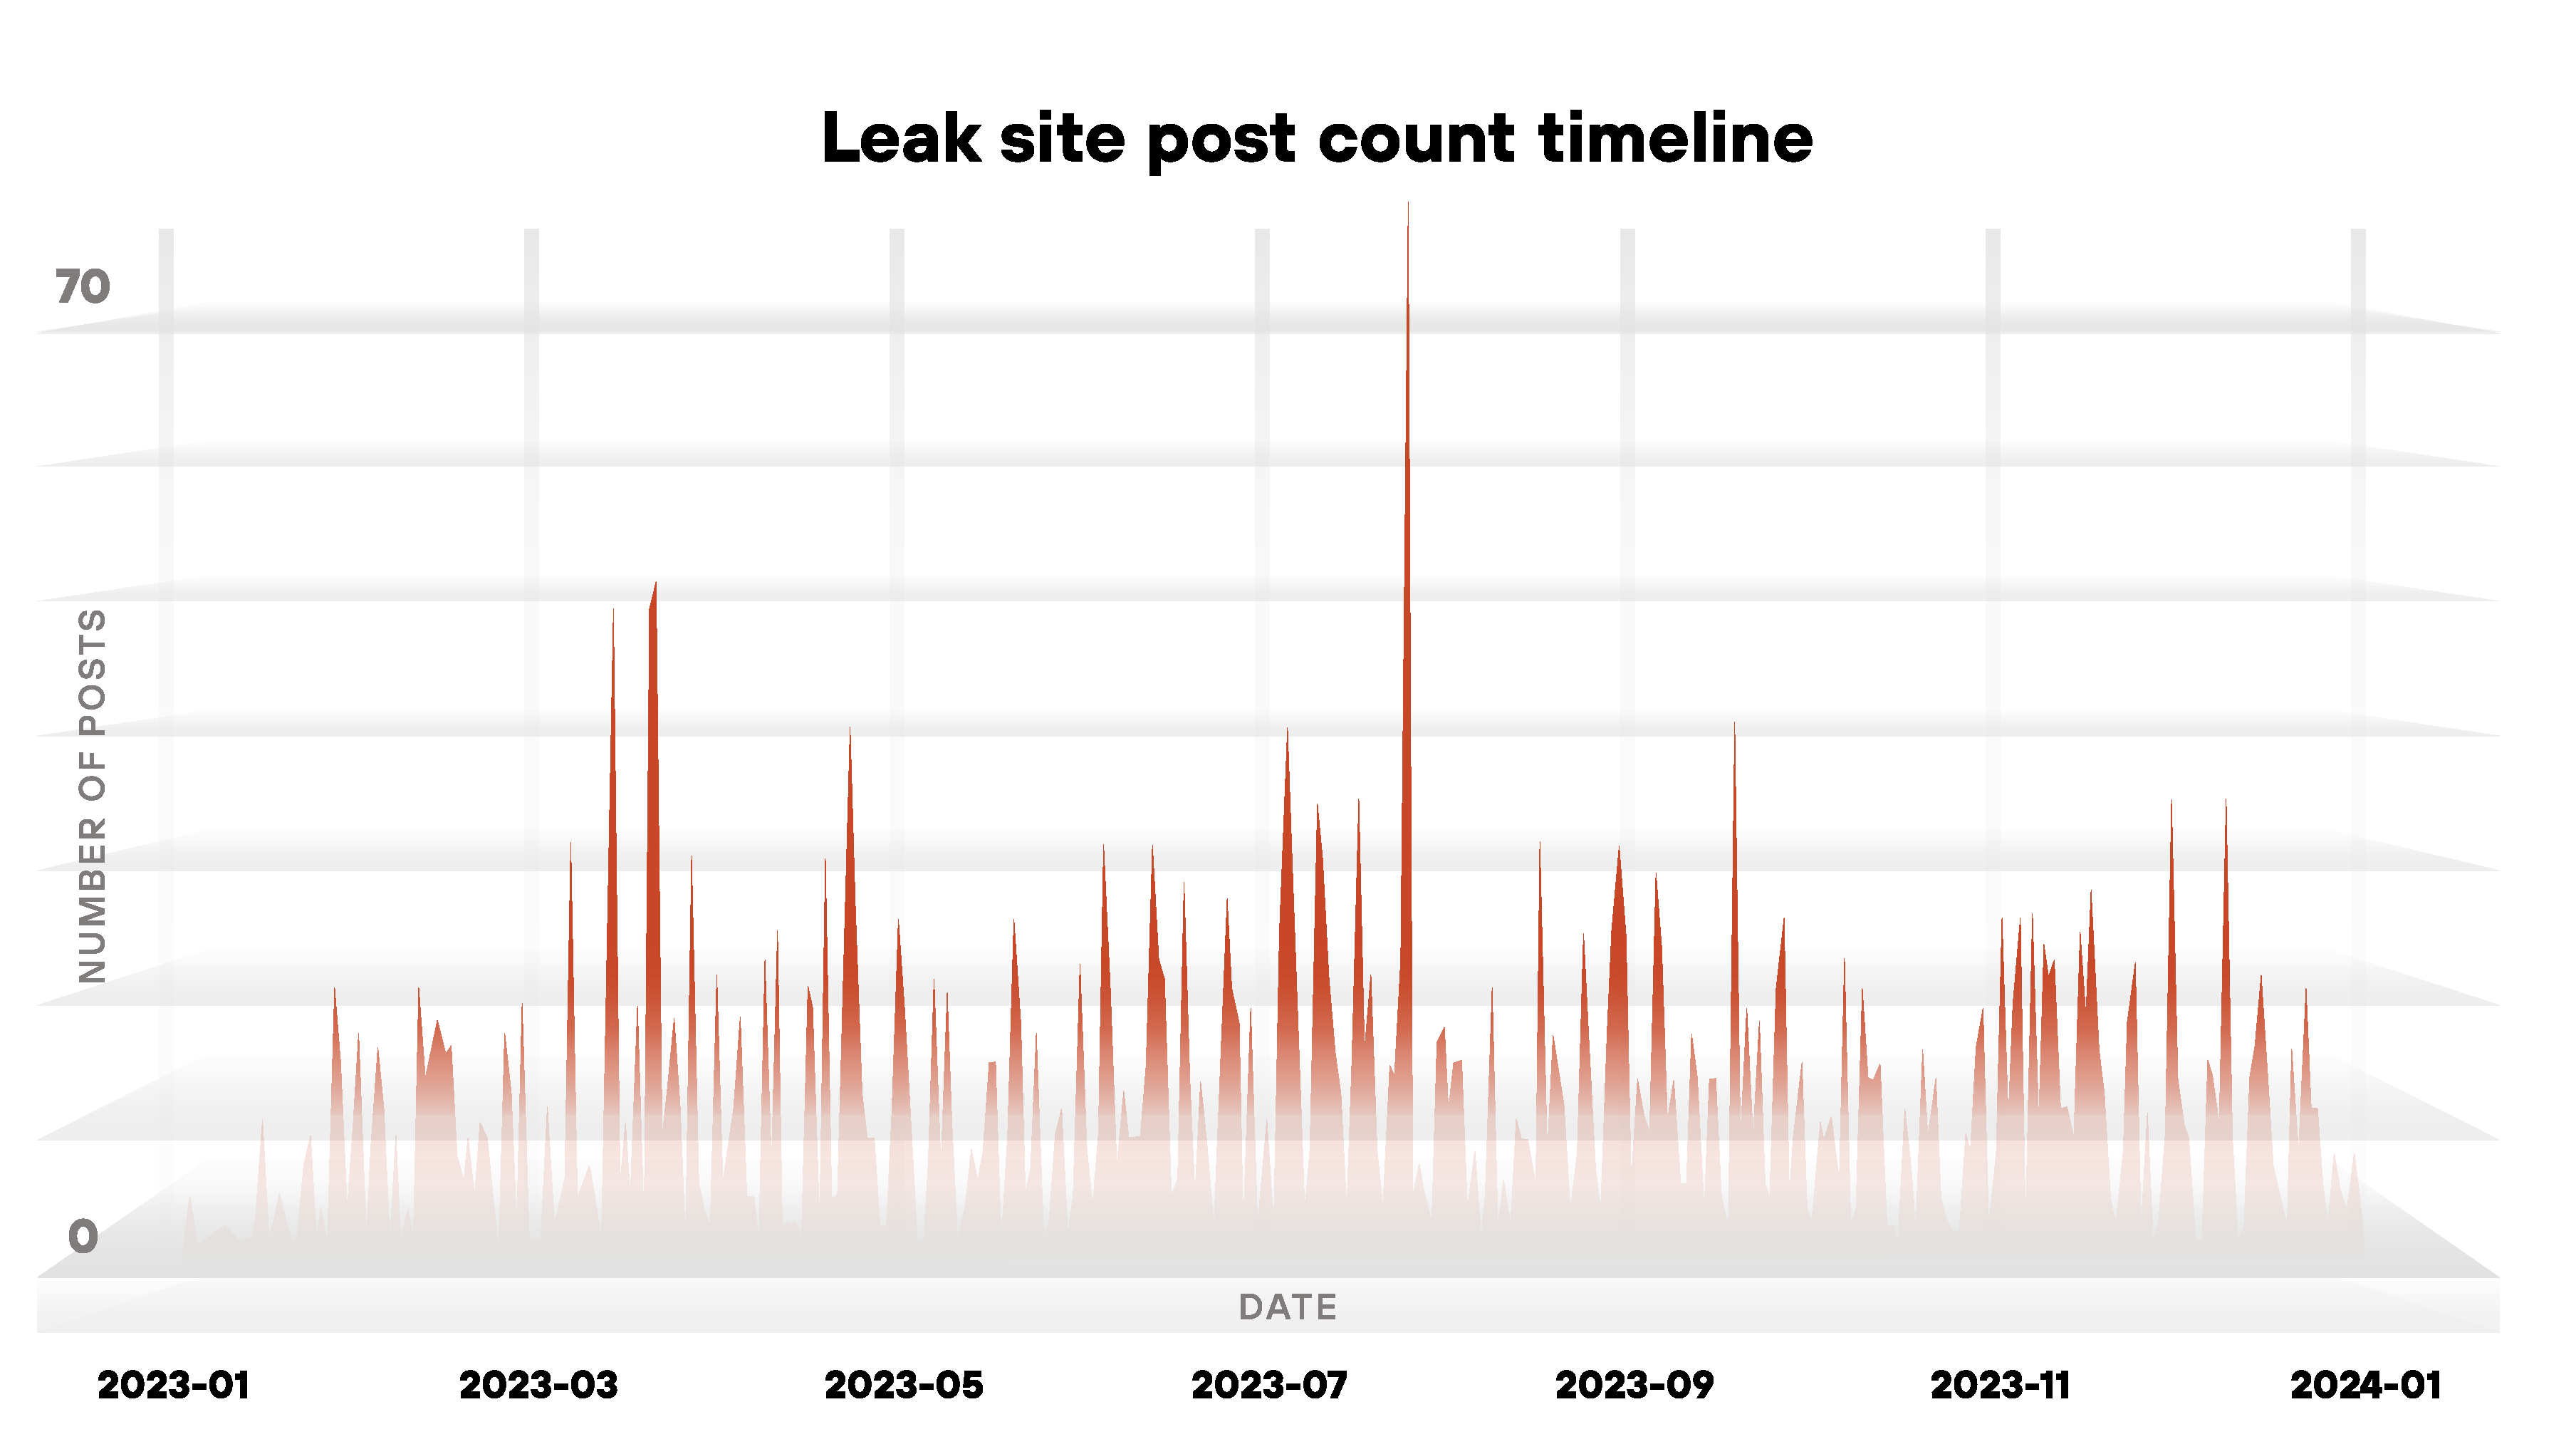 Image 8 is a chart of leak site post counts by month through all of 2023. The highest amount is over 70 in August. 